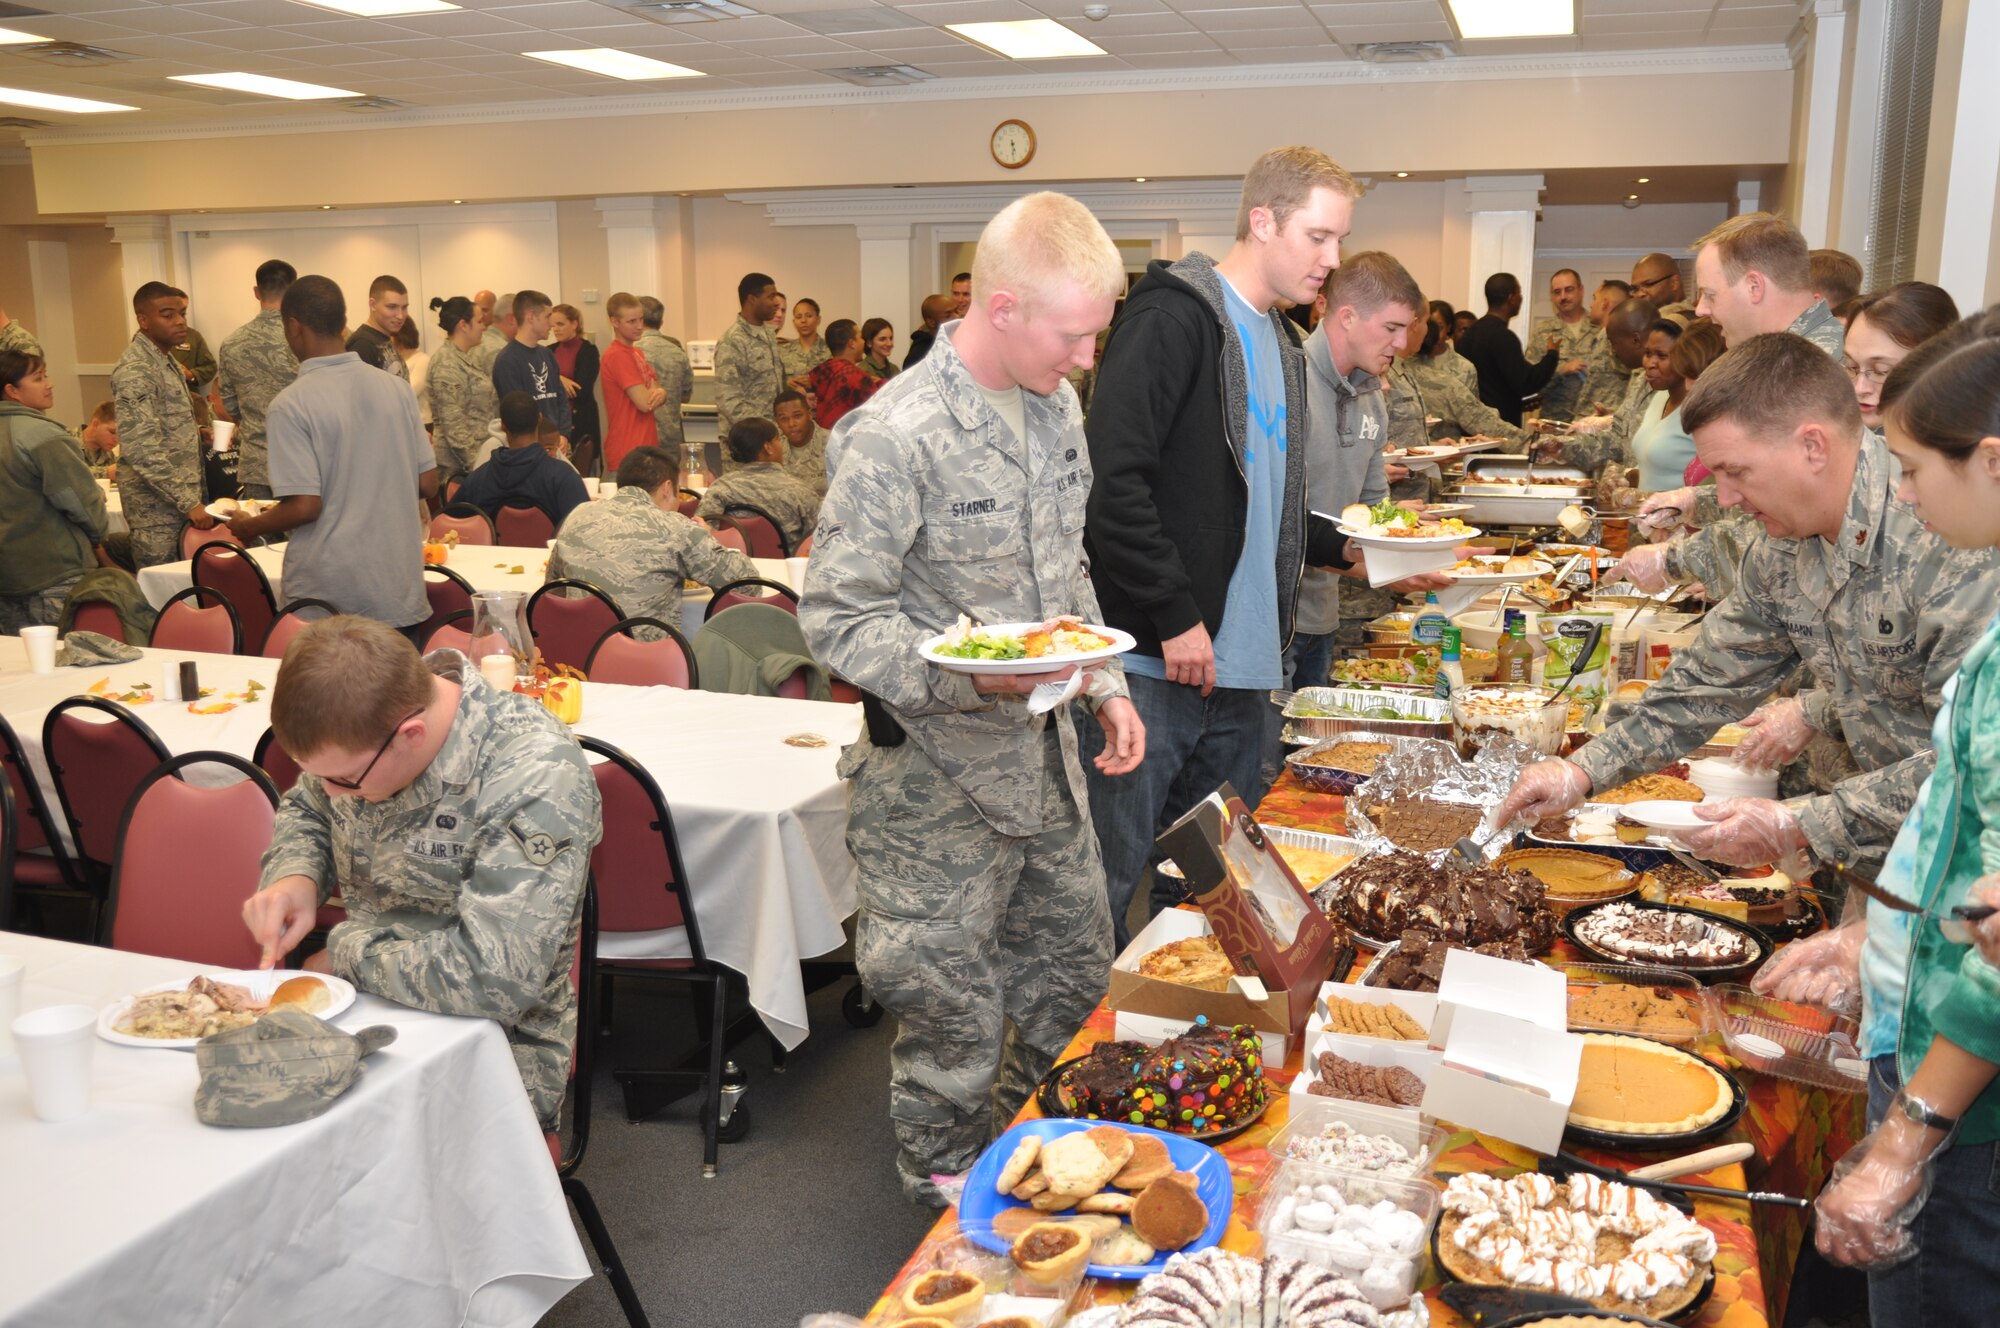 The base chapel was packed with attendees and volunteers for the Nov. 18 Dormsgiving event. Leaders from all over the base came and offered their services to help make a Thanksgiving dinner for enlisted dorm residents. (U.S. Air Force photo/Airman 1st Class Chase Hedrick